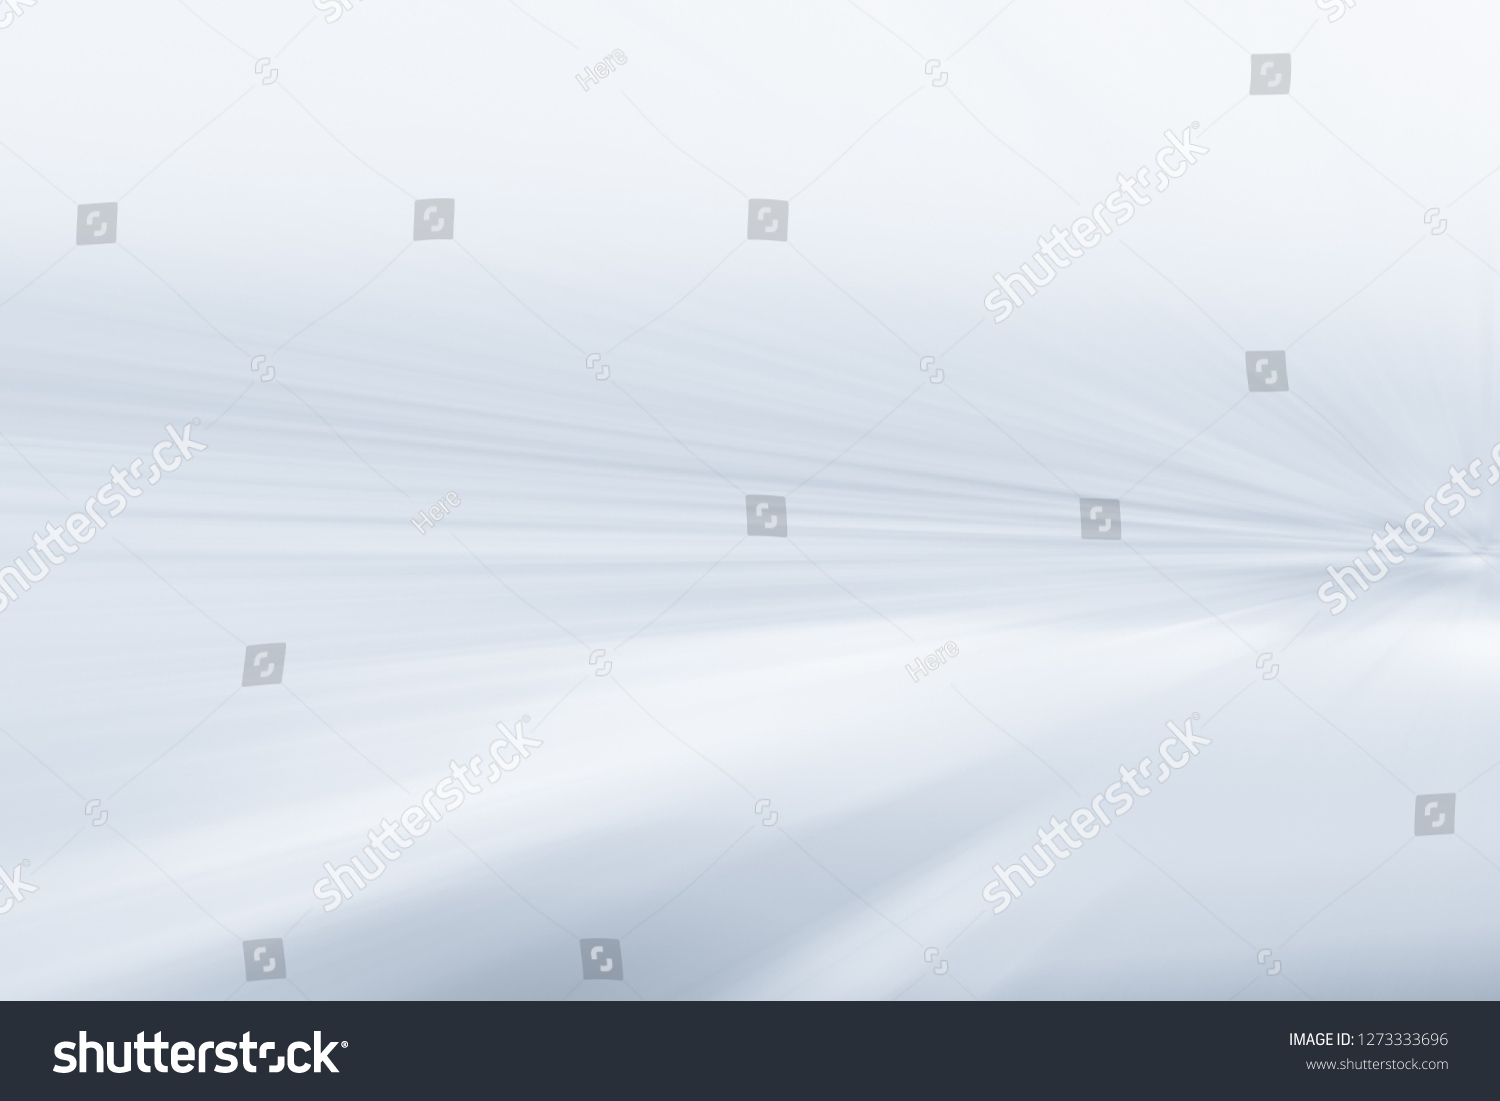 BLURRED MOTION BACKGROUND, VELOCITY, SPEED LINES #1273333696